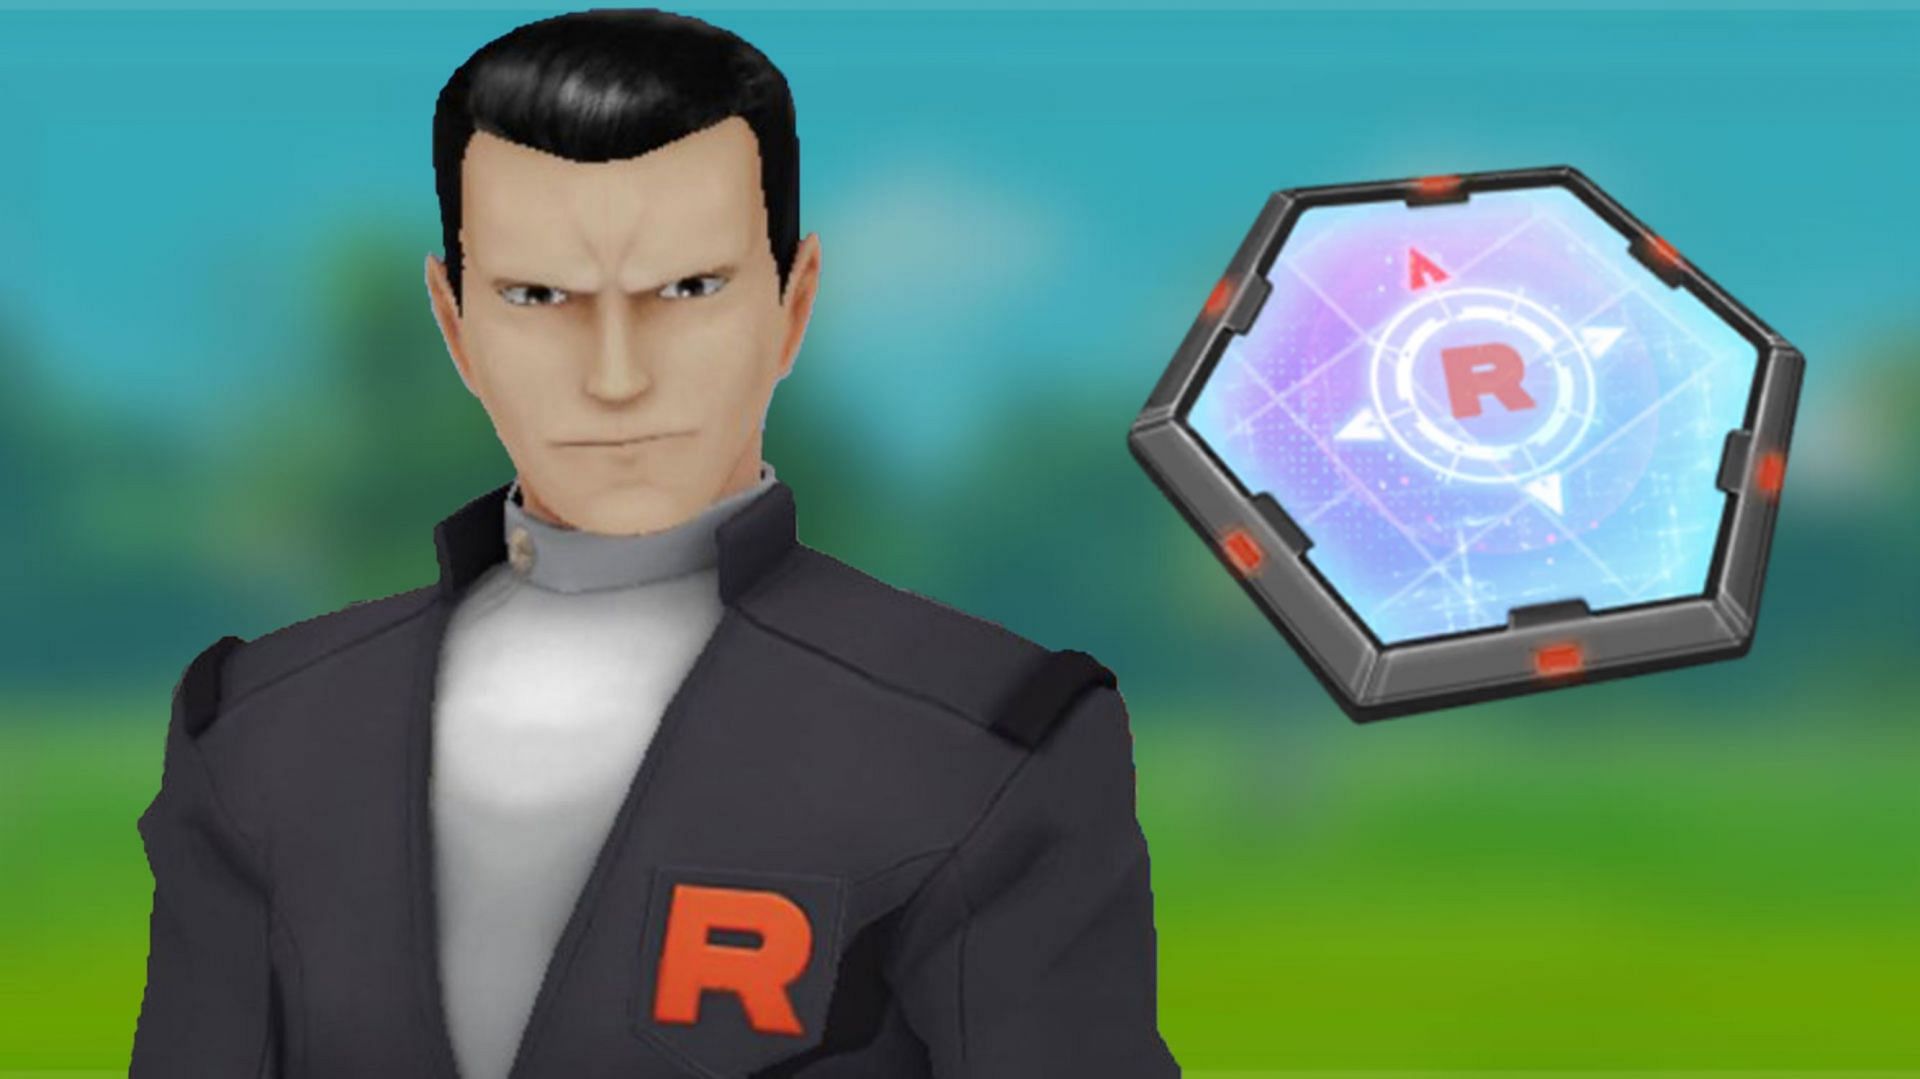 Will there be a Giovanni update in Pokemon GO during June 2022?